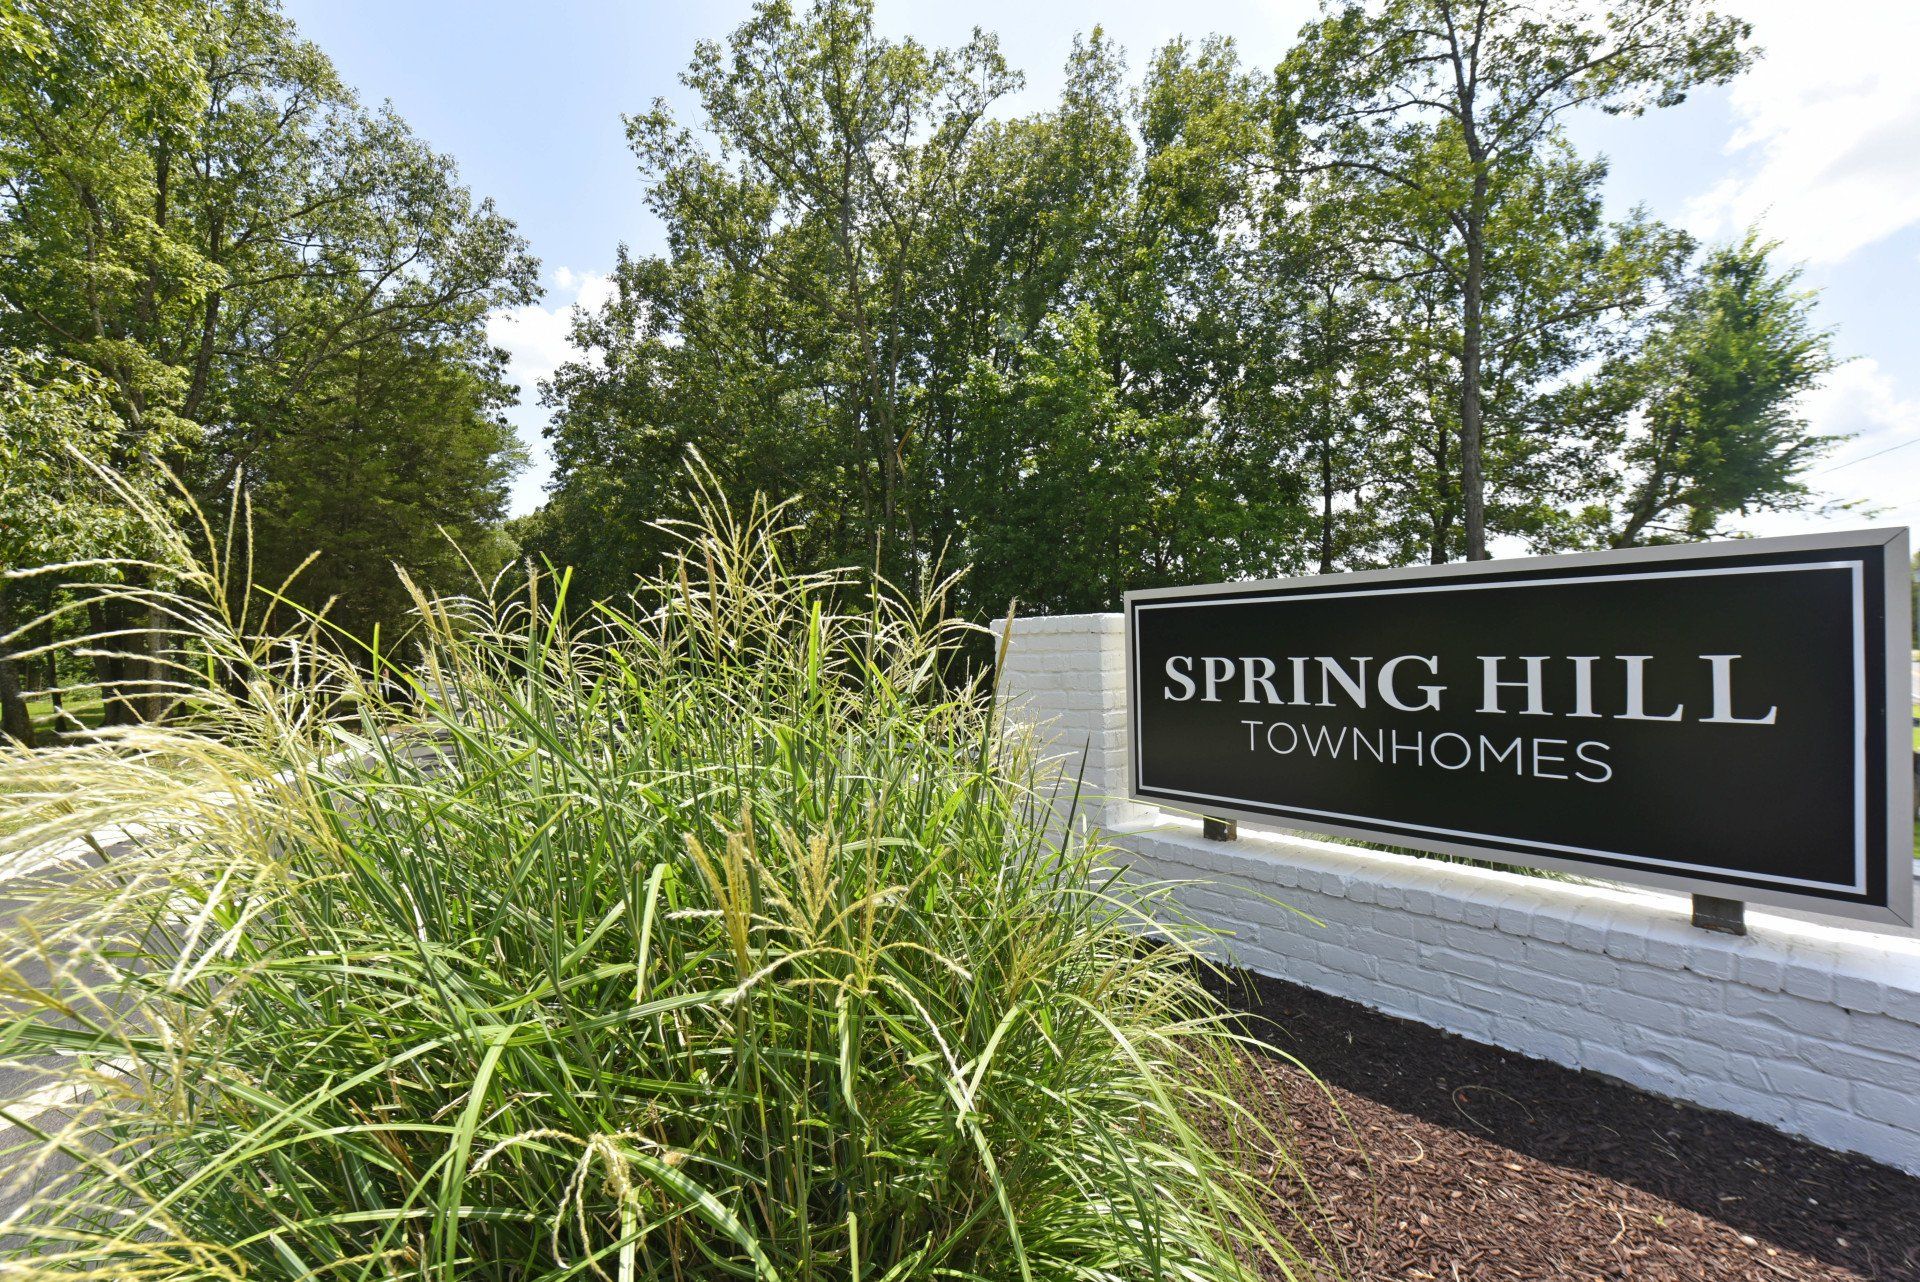 SPRING HILL TOWNHOMES Photo